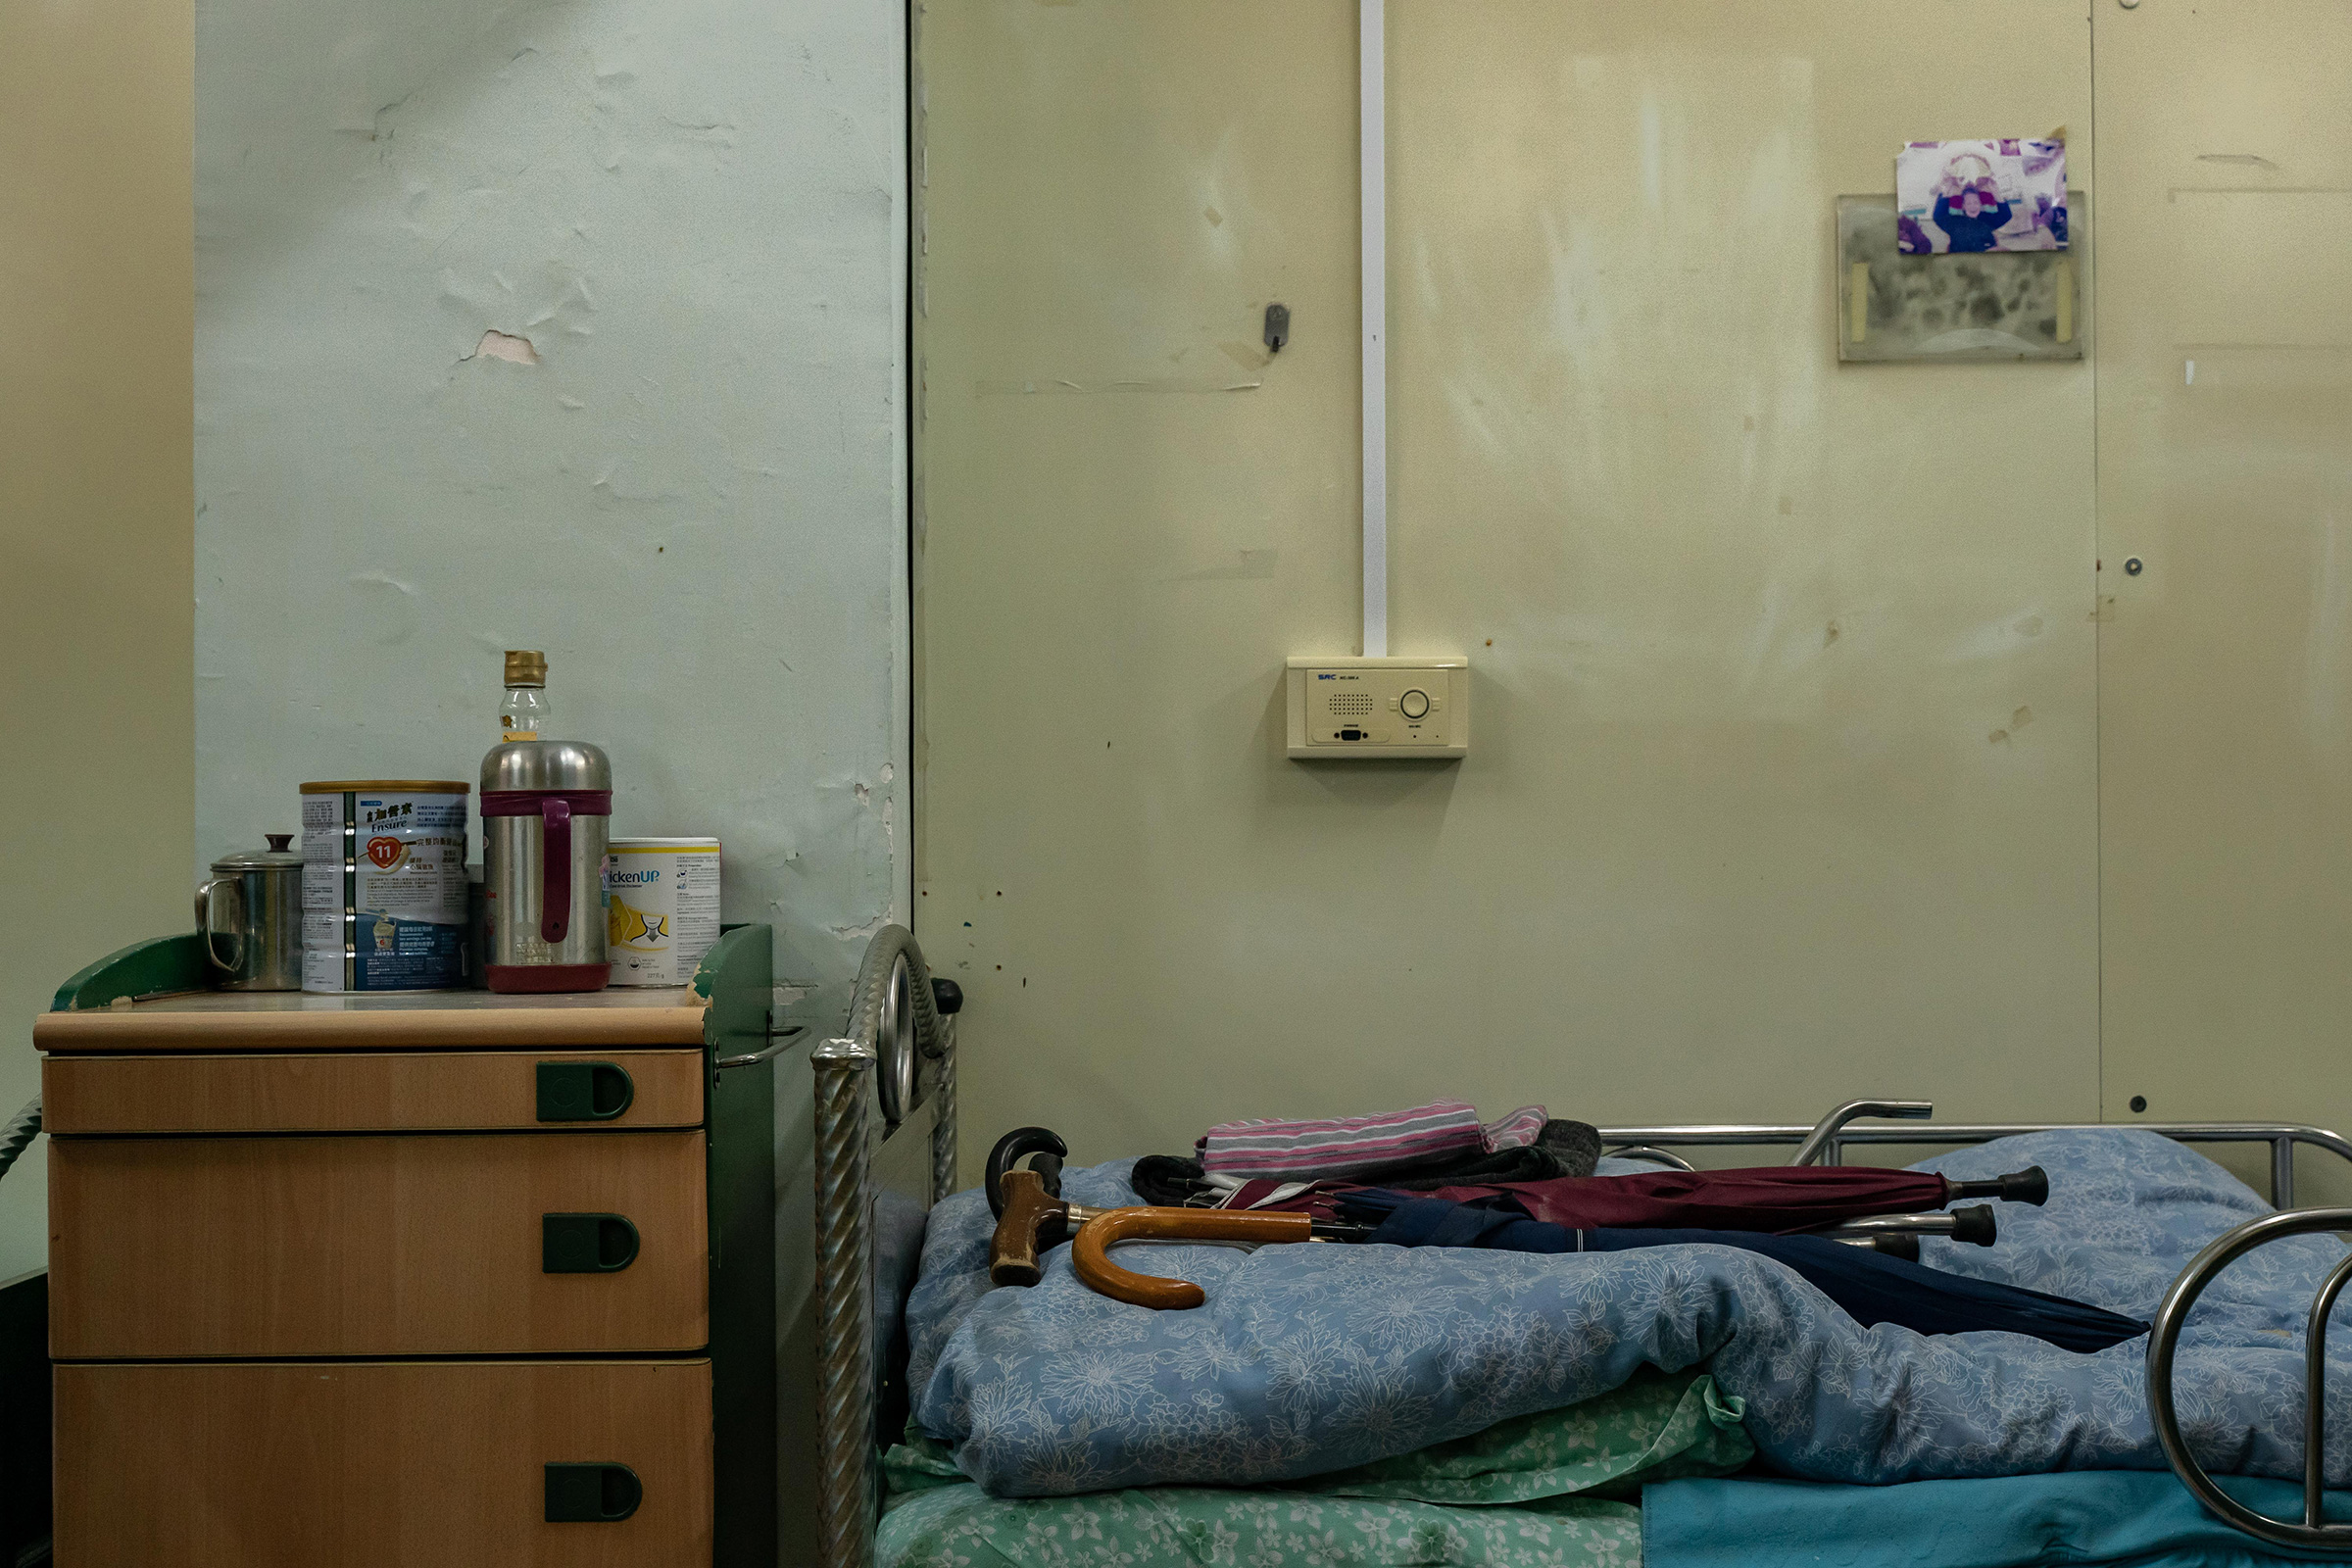 Personal effects left by a deceased resident, seen on a bed at Hong Kong's Kei Tak (Tai Hang) Home for the Aged. (Anthony Kwan for TIME)